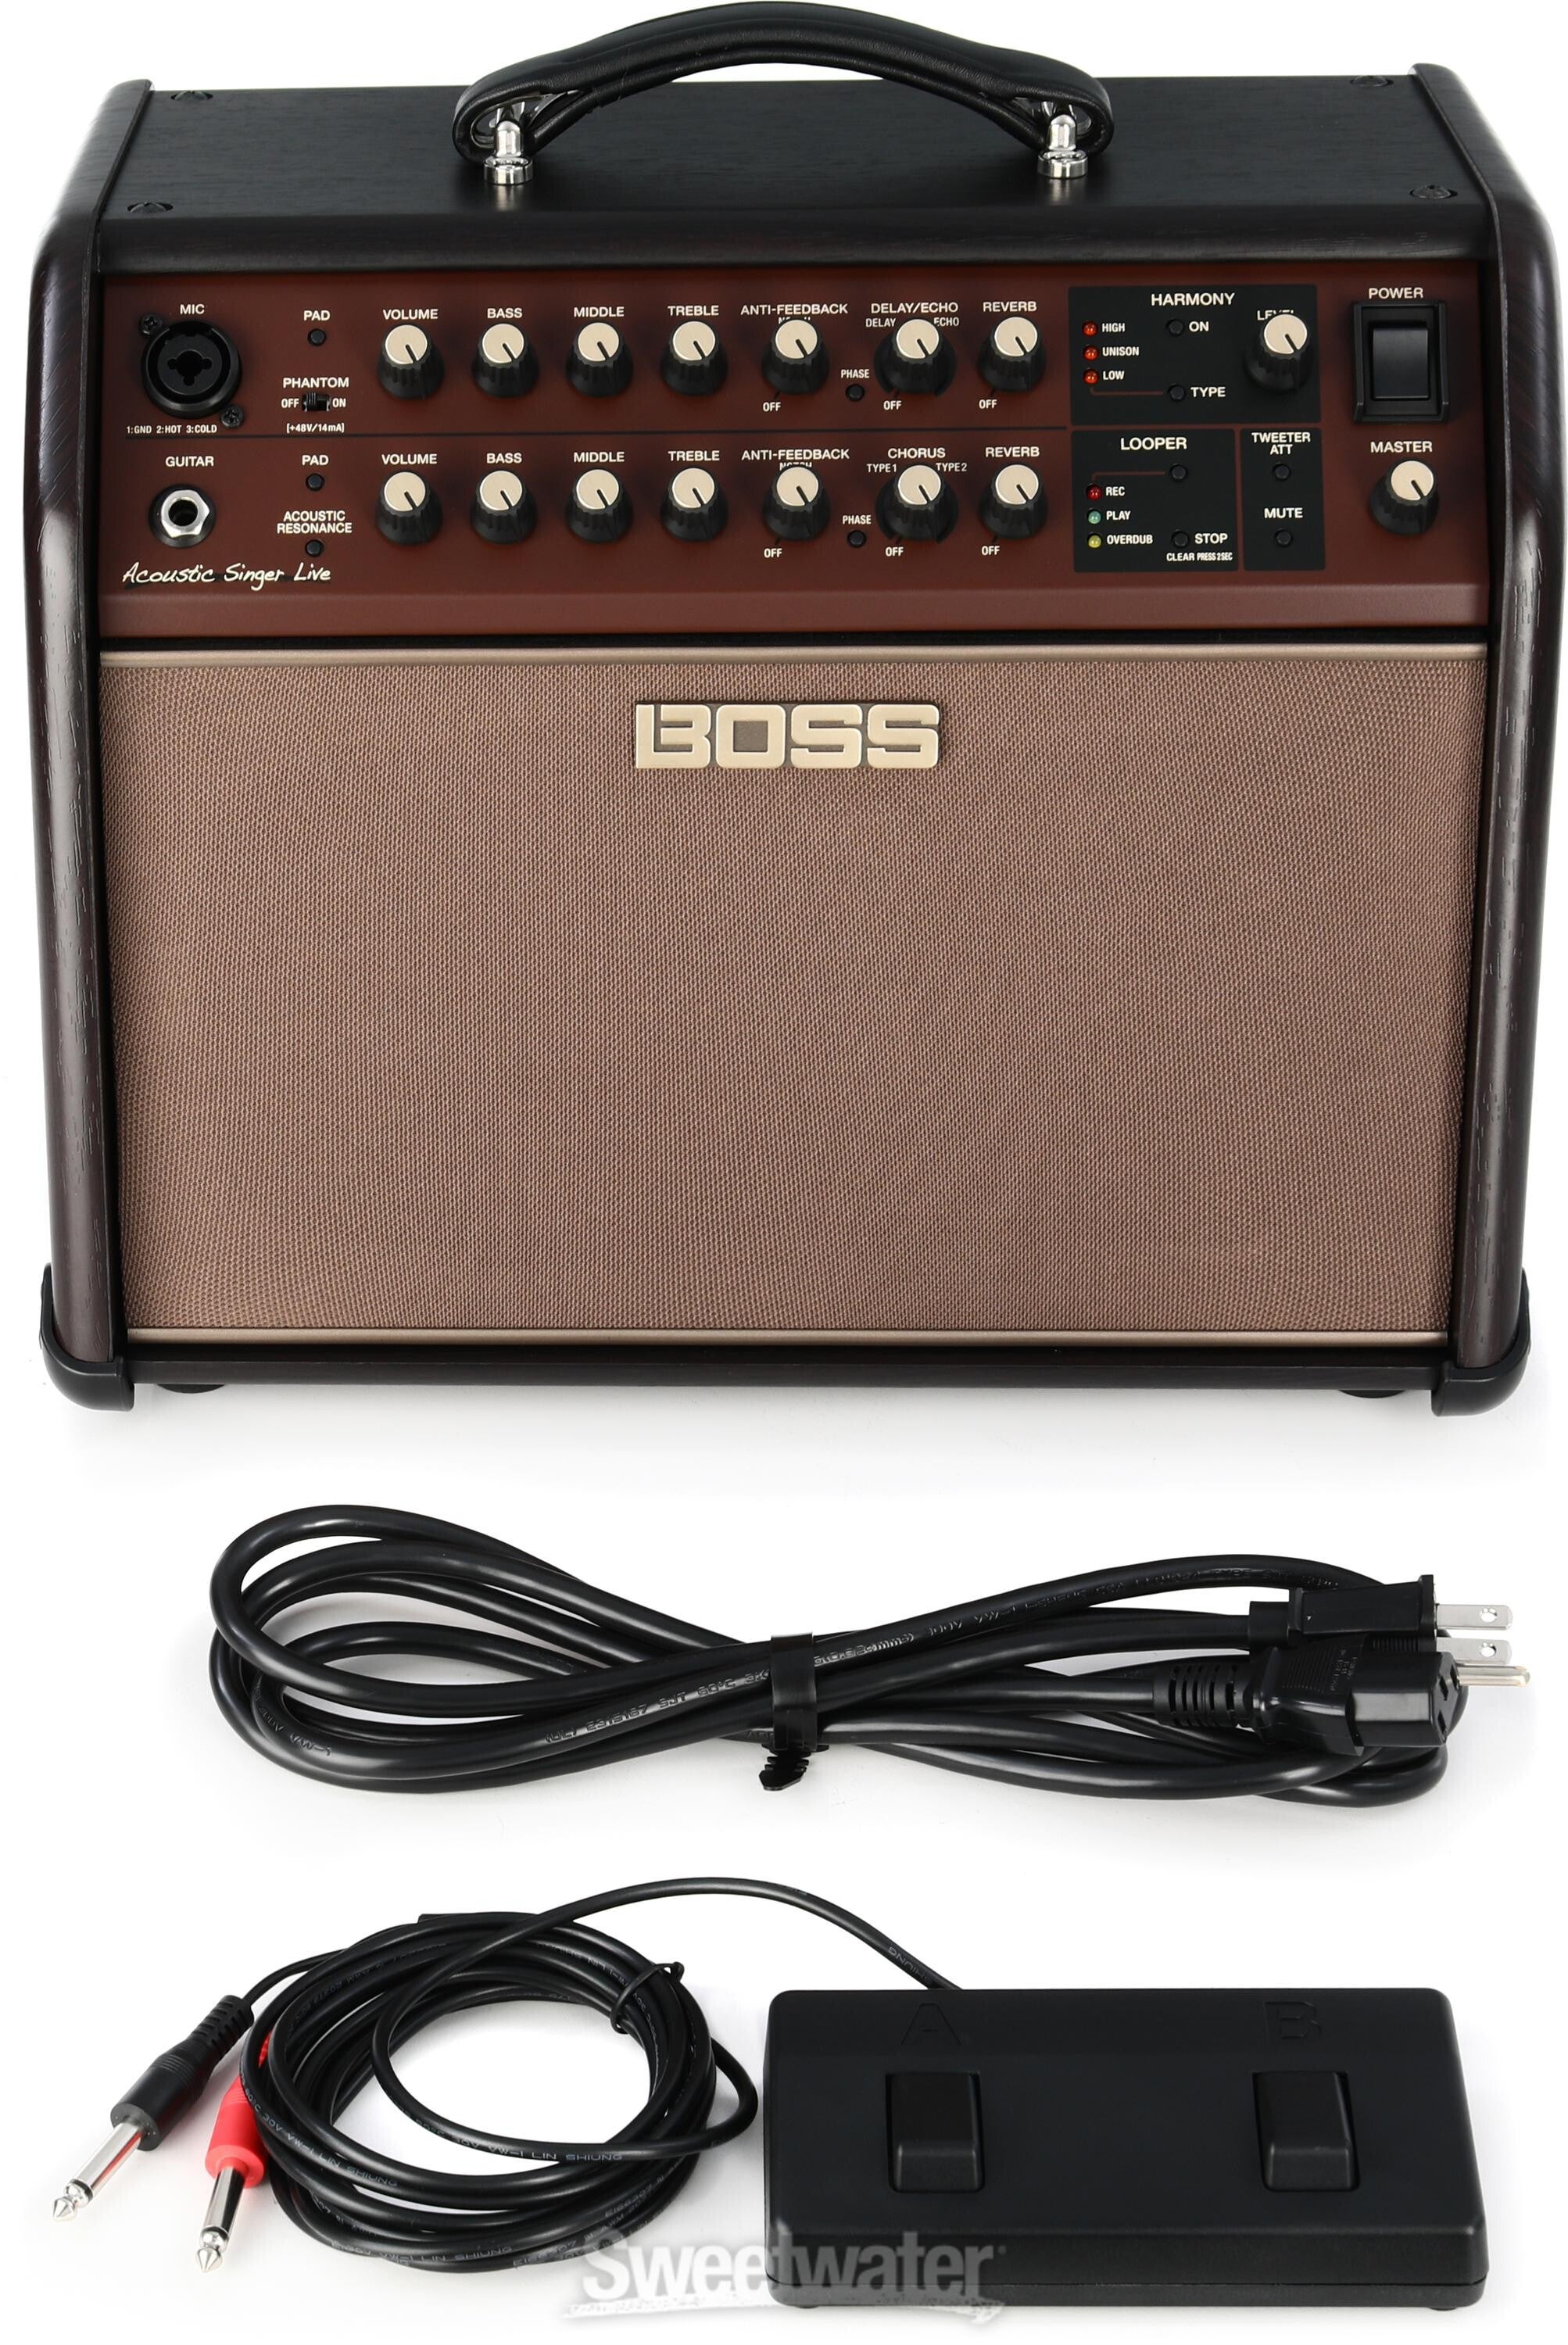 THE PERFECT SMALL ACOUSTIC GIGGING AMP?! Boss Acoustic Singer Live LT  (Demo) 